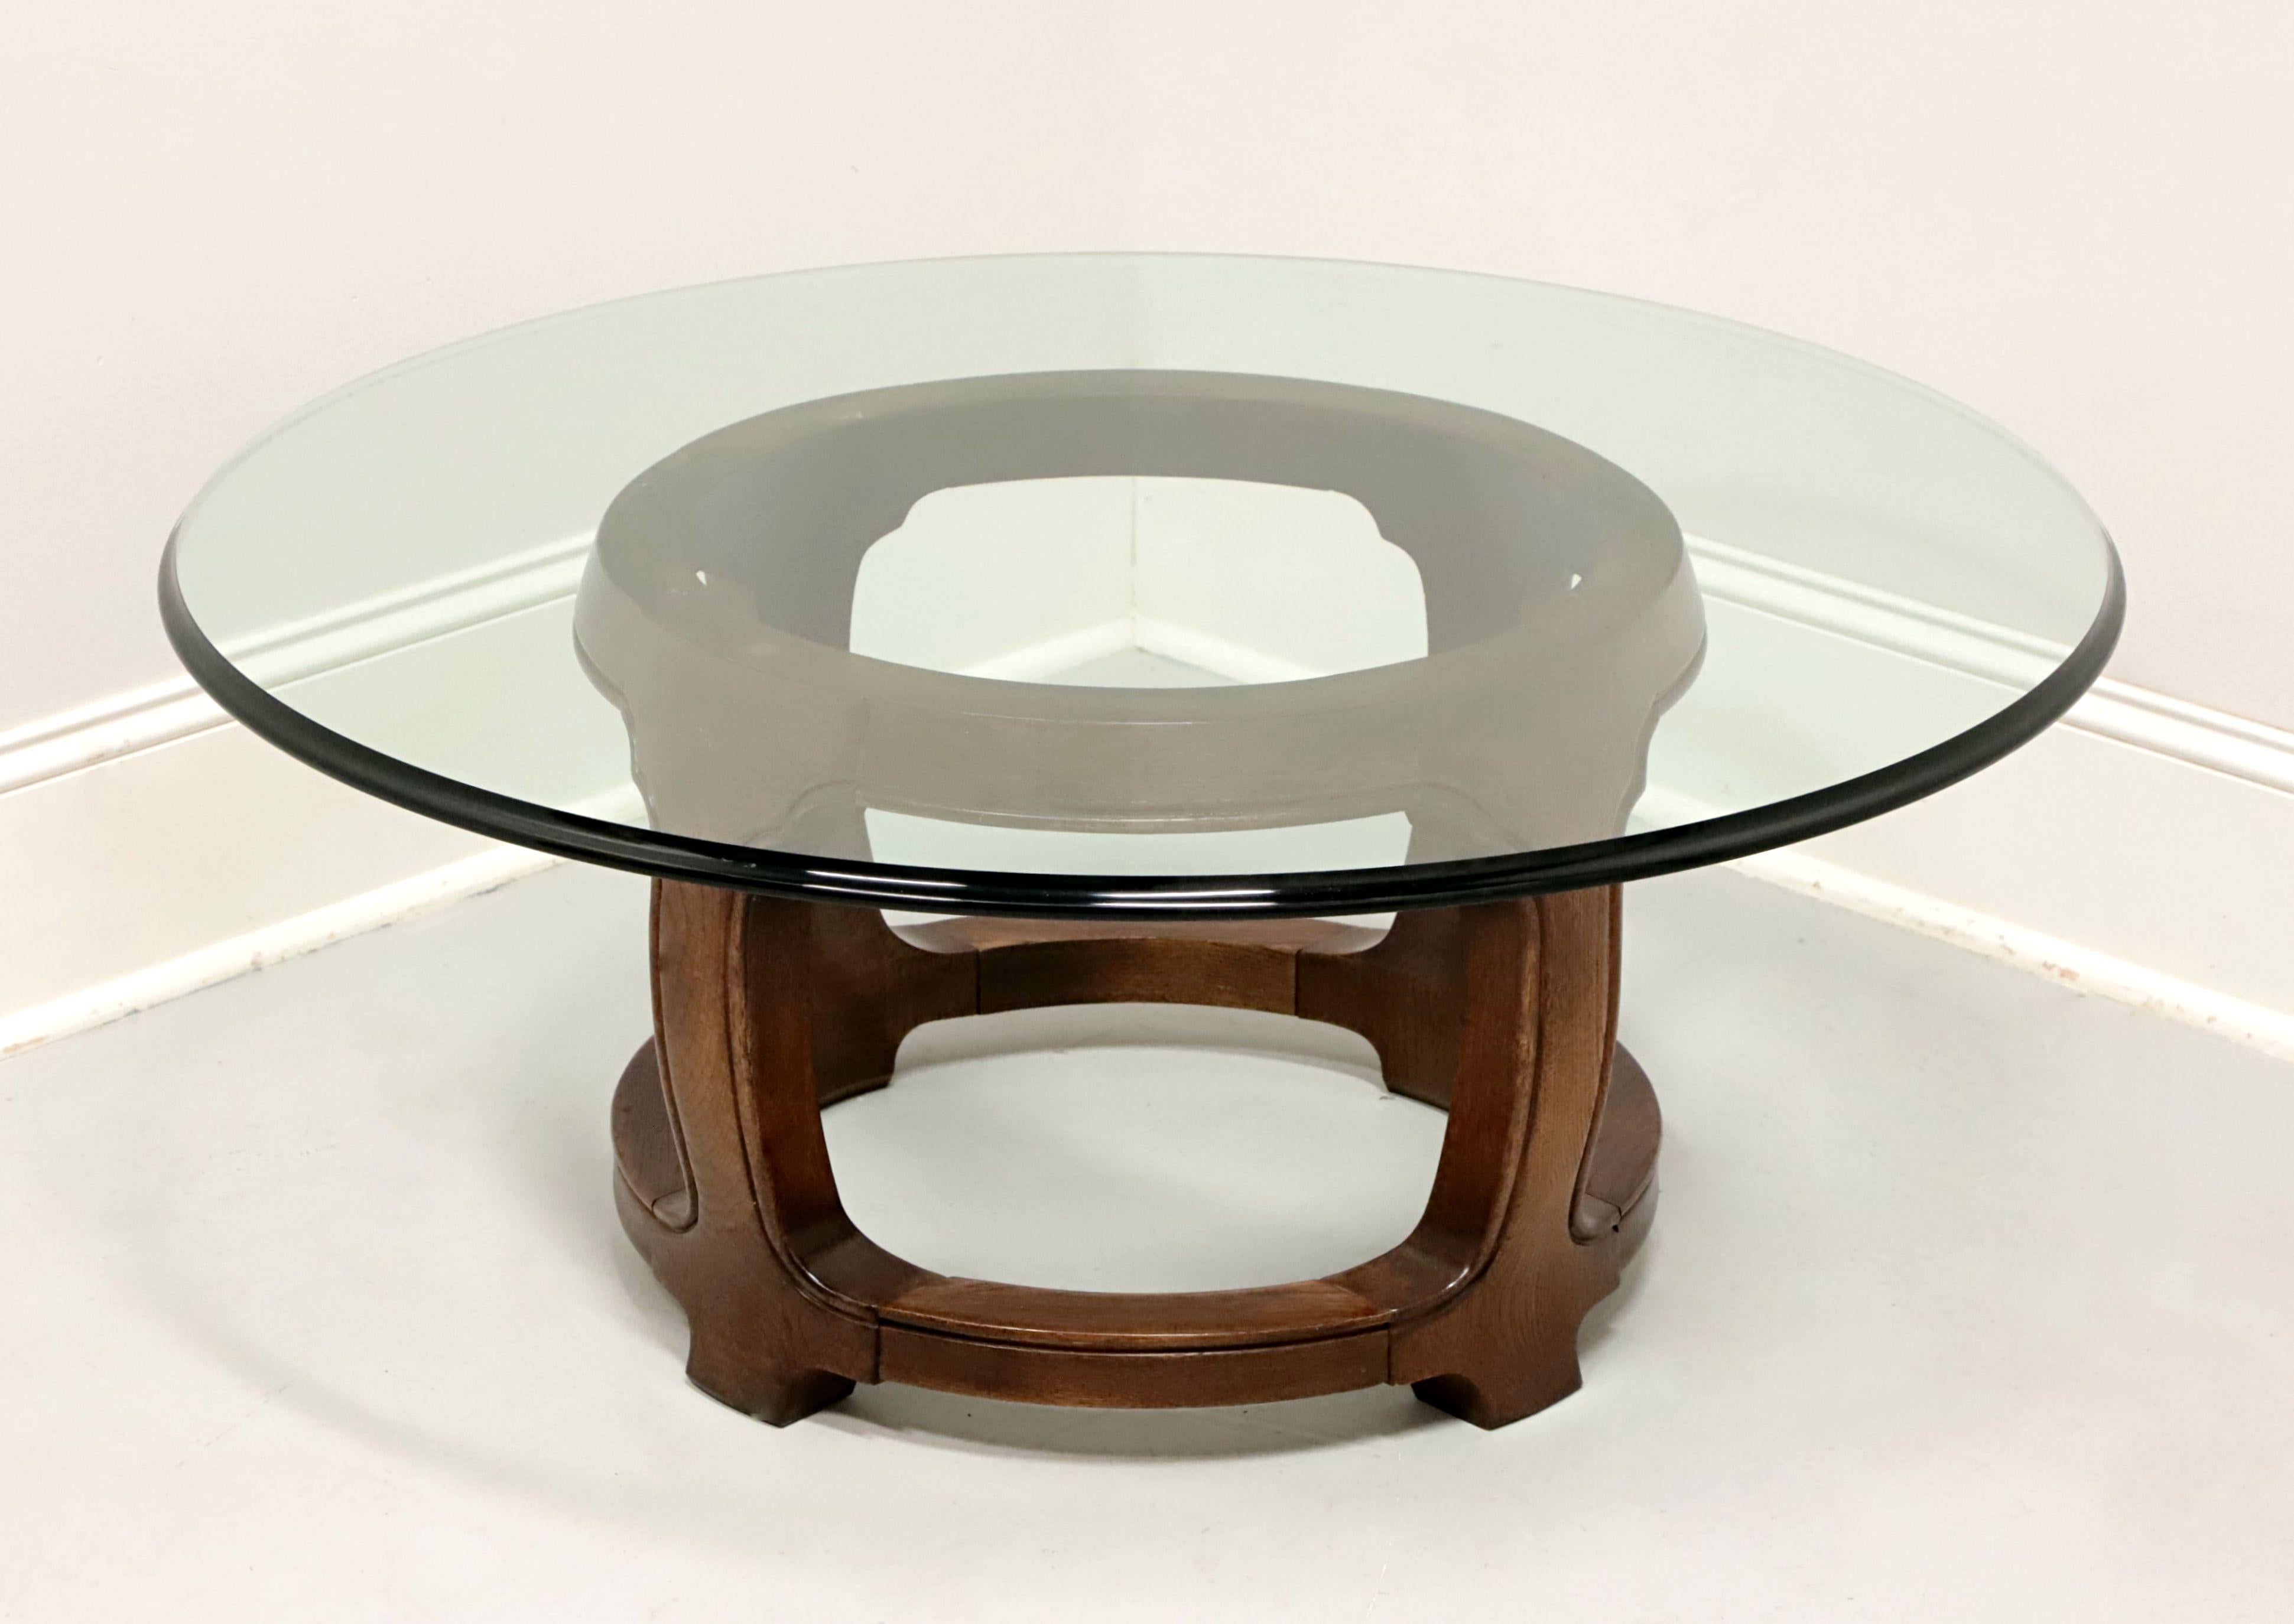 Chinoiserie THOMASVILLE Walnut Asian Round Glass Top Coffee Cocktail Table